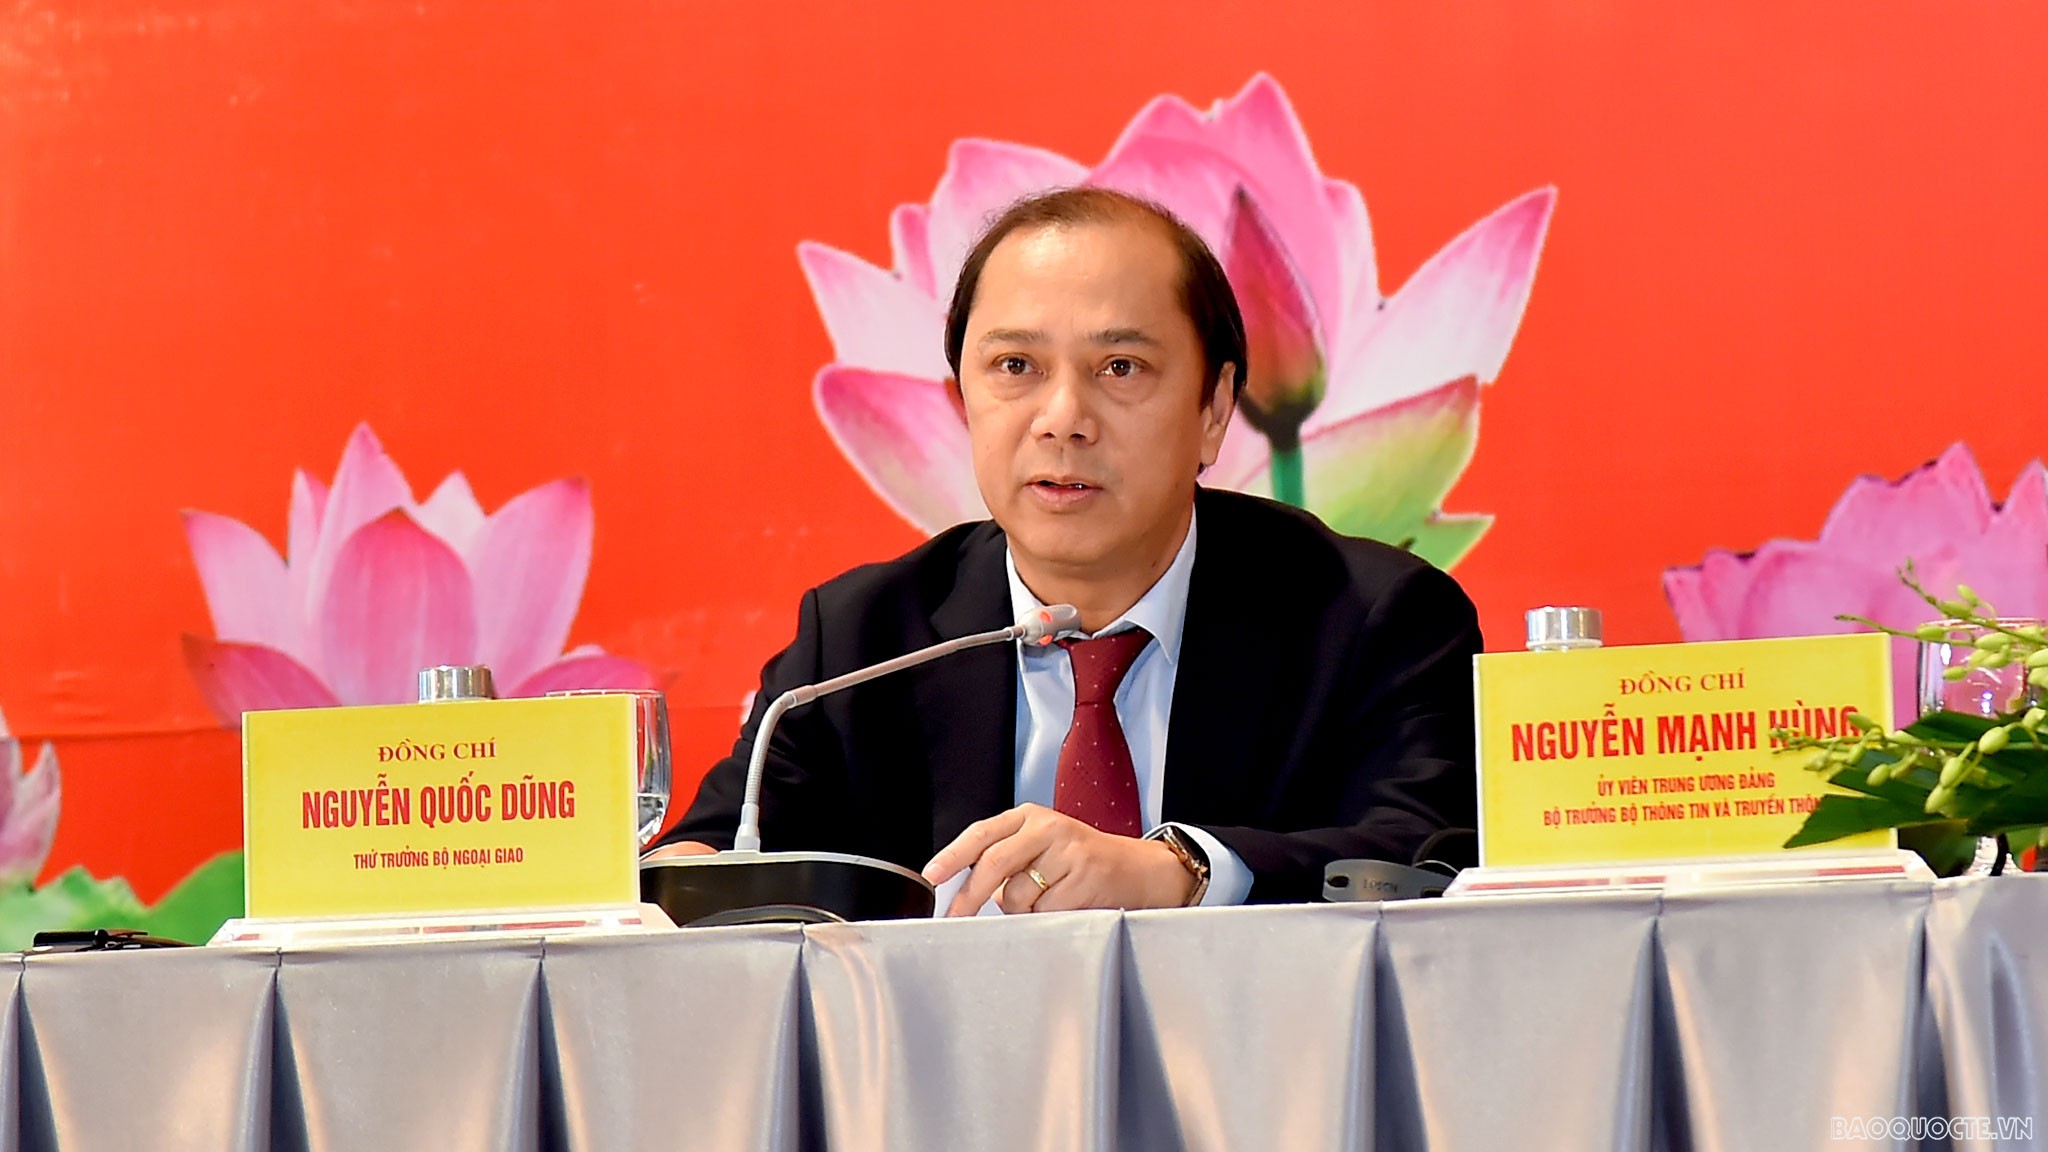 Viet Nam’s chairmanship helped ASEAN assert centrality in region: Deputy Foreign Minister Nguyen Quoc Dung